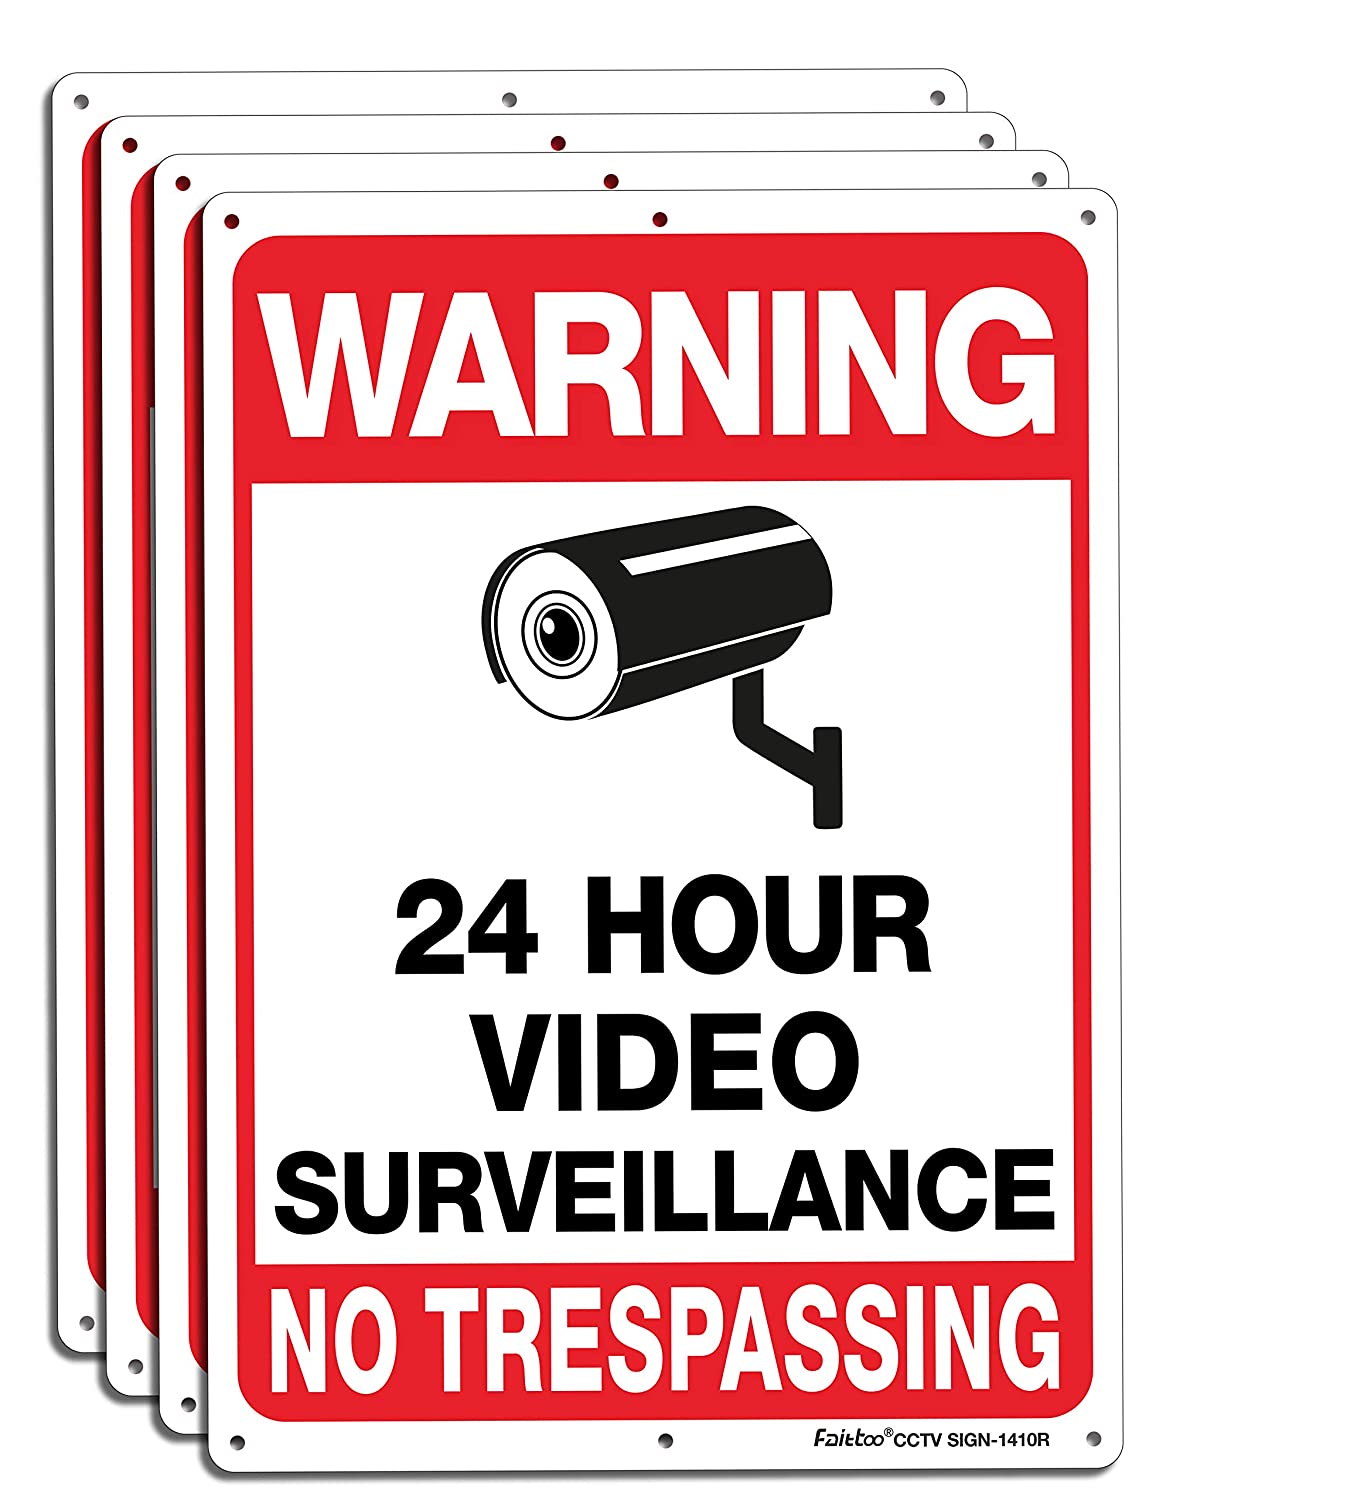 Video Surveillance Sign, No Trespassing Sign, Metal Reflective Warning Sign, 4 Pack, 14x10 Inches .040 Aluminum, Indoor or Outdoor Use for Home Business CCTV Security Camera,UV Protected &amp; Waterproof